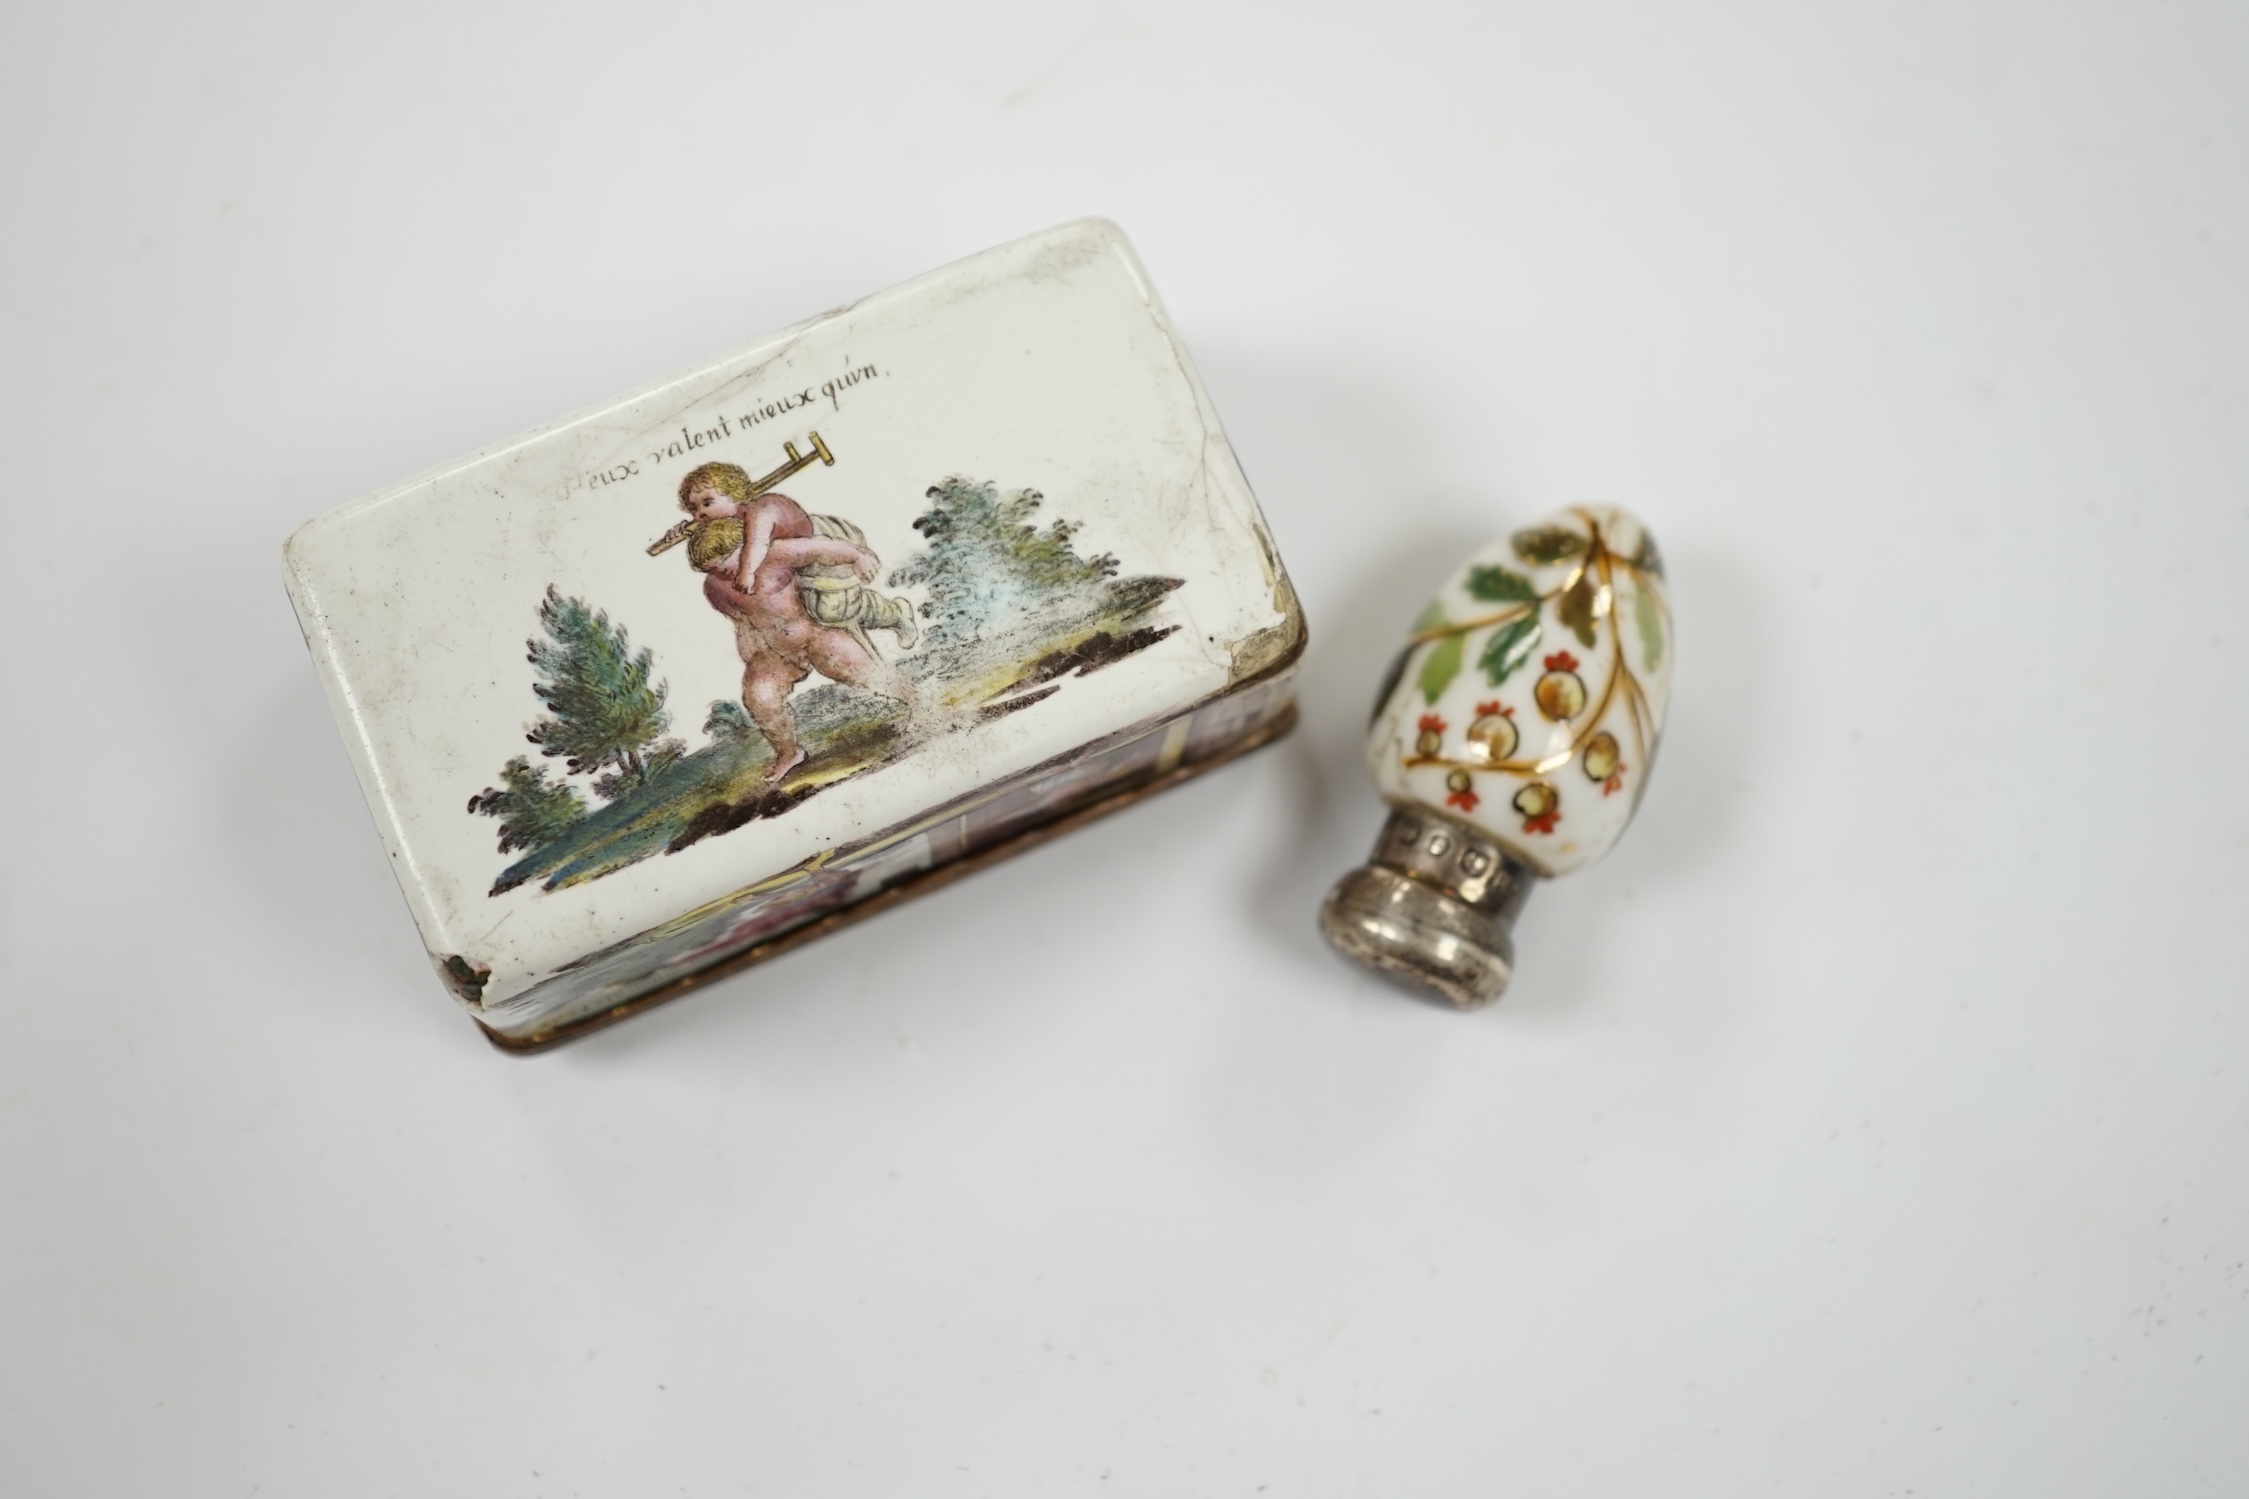 An 18th century French enamel snuff box and a late 19th century silver mounted porcelain scent bottle, largest 7.5cm. Condition - box poor, scent bottle fair